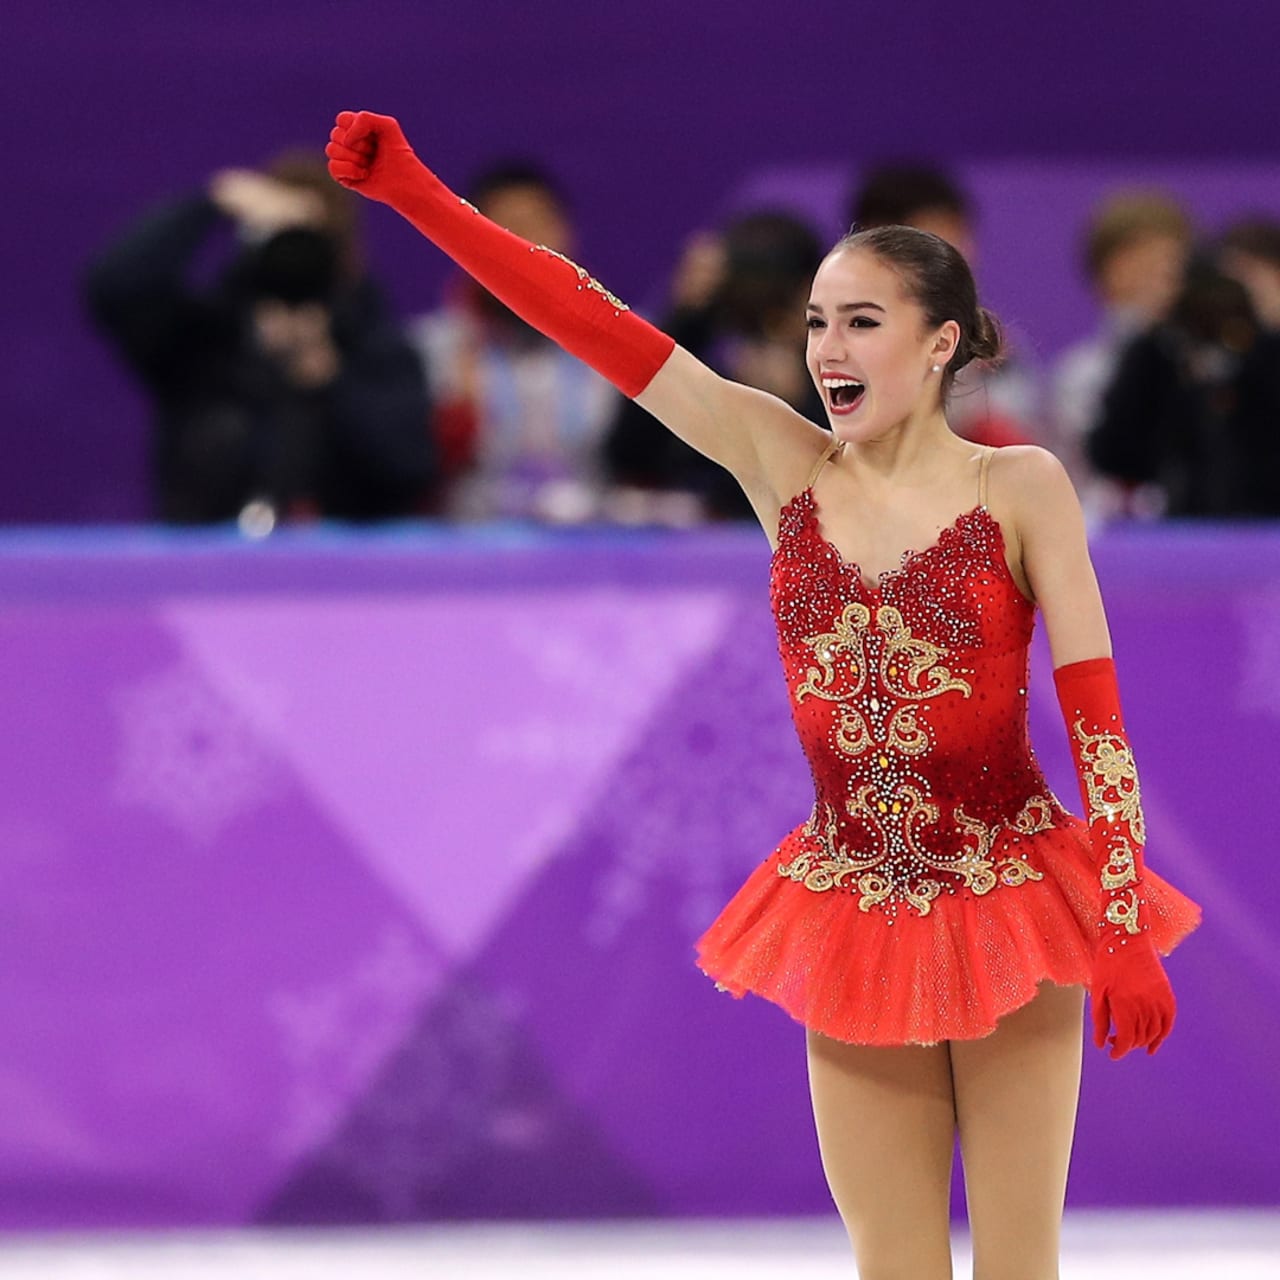 Russia Banned Figure Skating